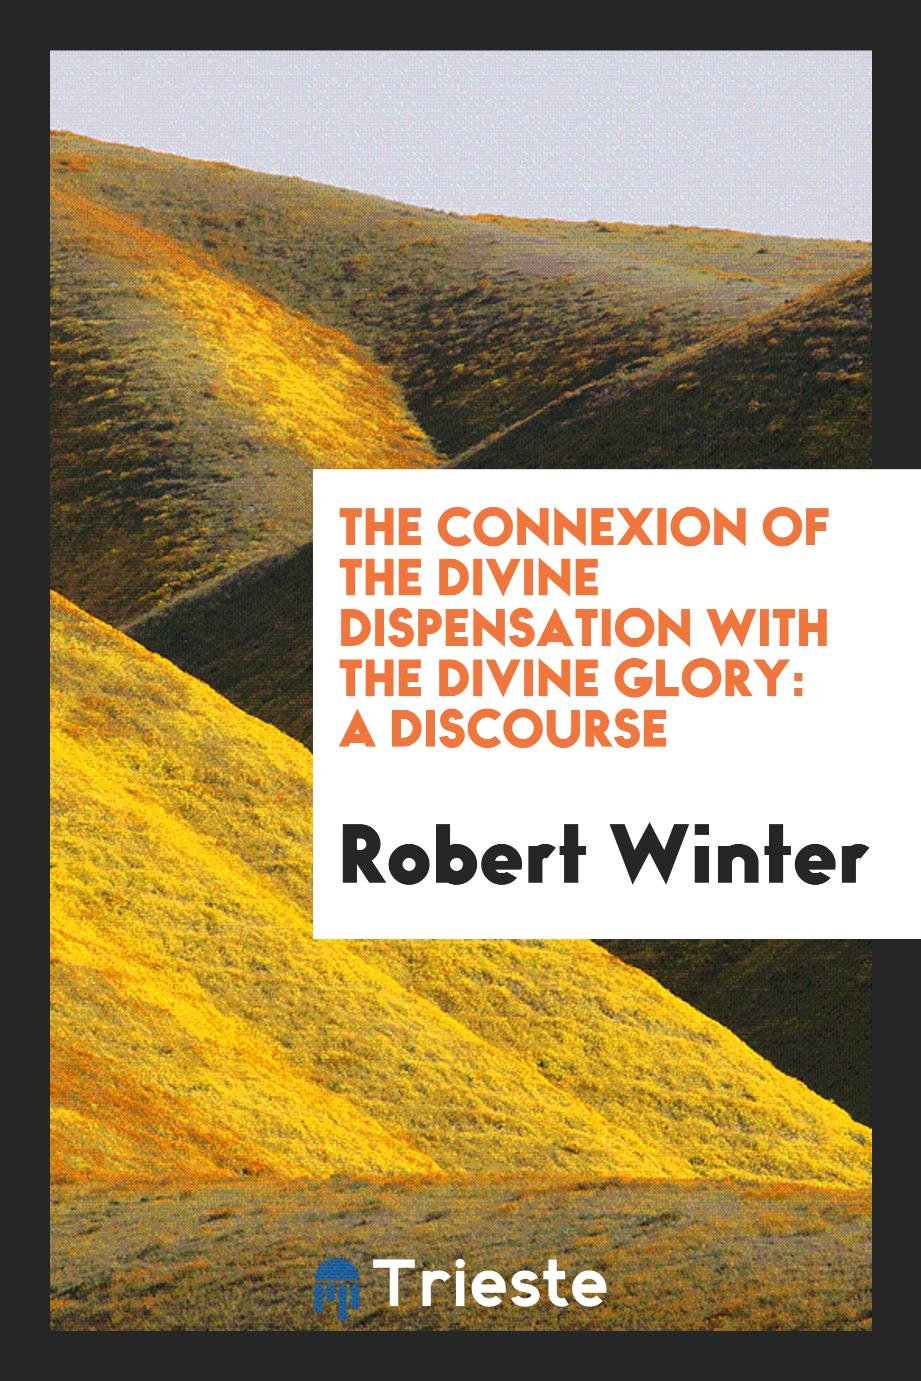 The connexion of the divine dispensation with the divine glory: A discourse